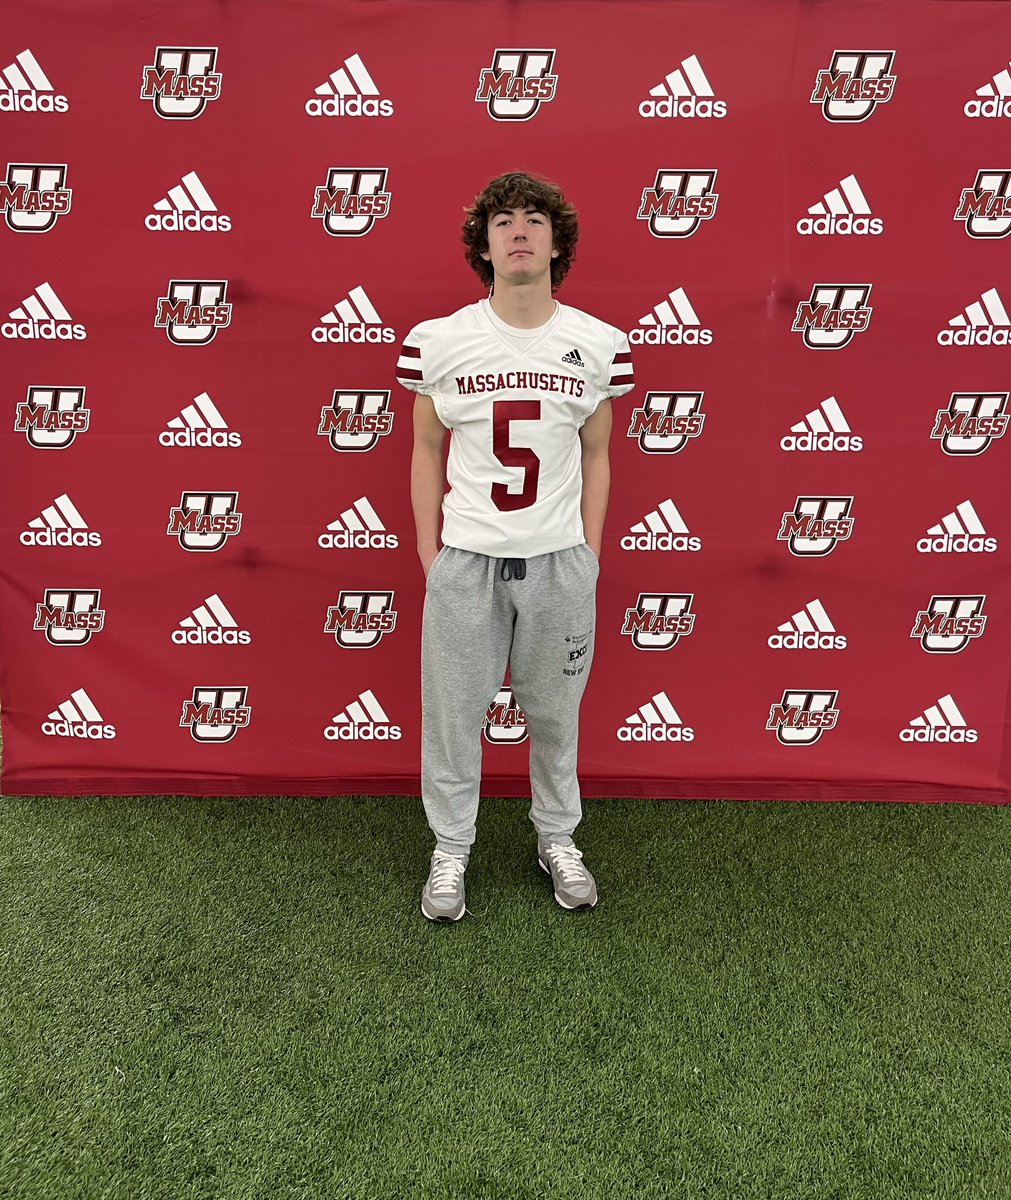 Had a great experience today at Umass. Thanks for the invite! @UMassFootball @CoachRoPo @ValdamarTBrower @mikemorrisino